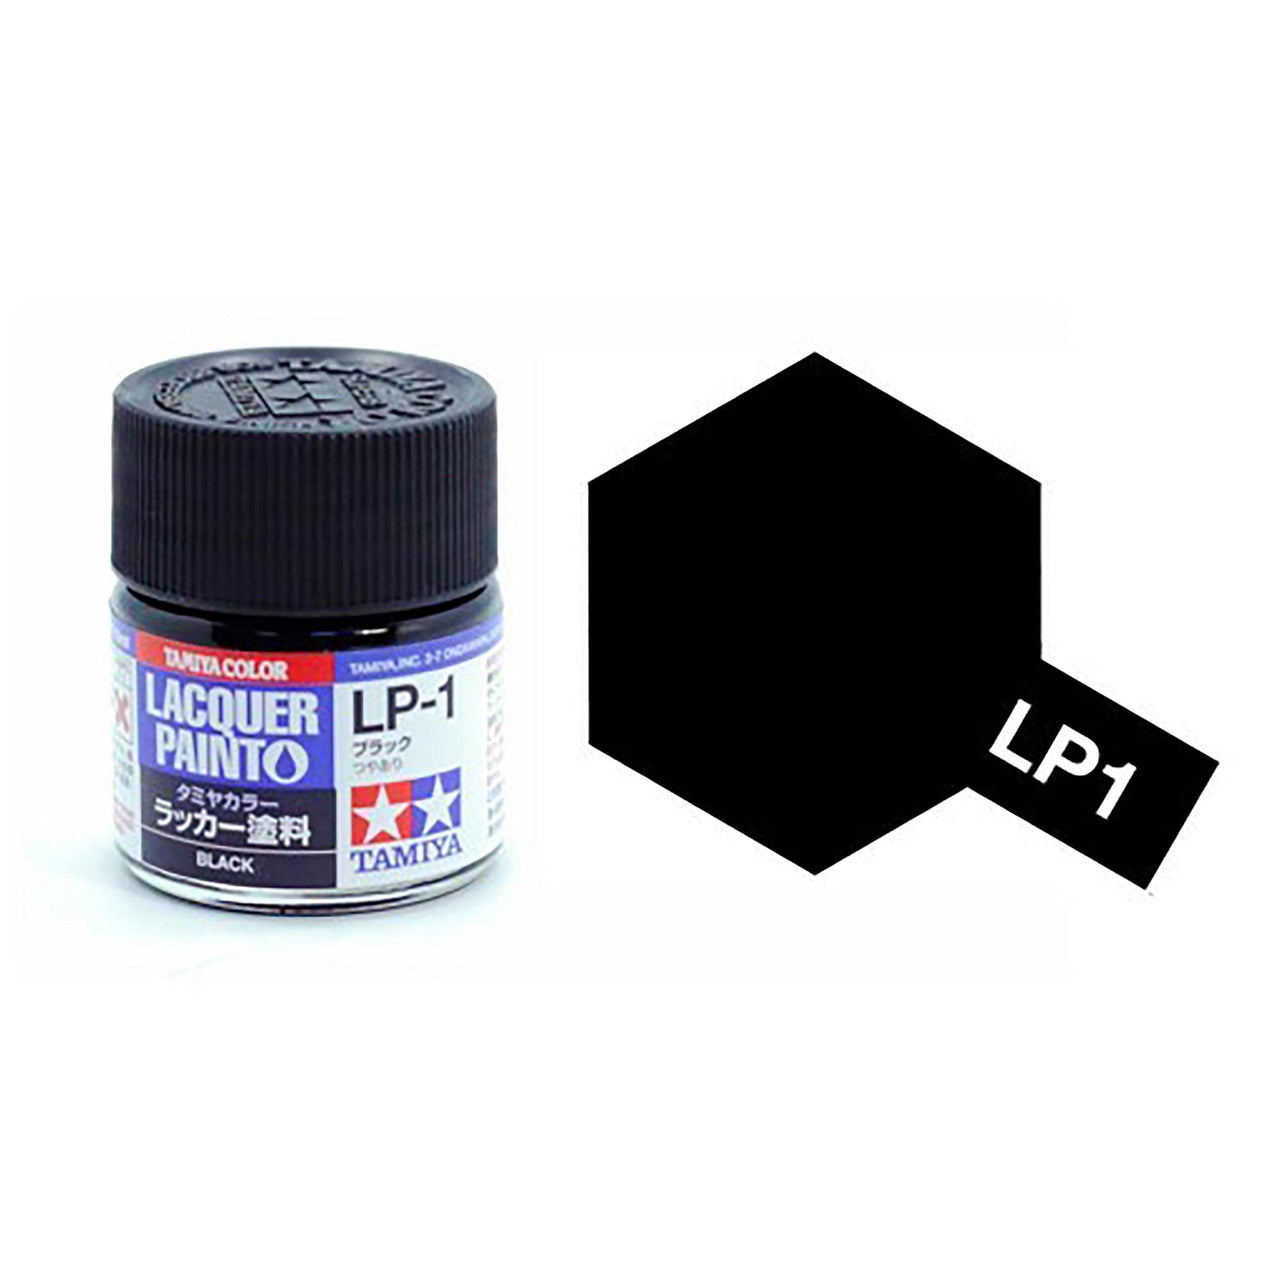 TAMIYA COLOR LACQUER PAINTS 10ML